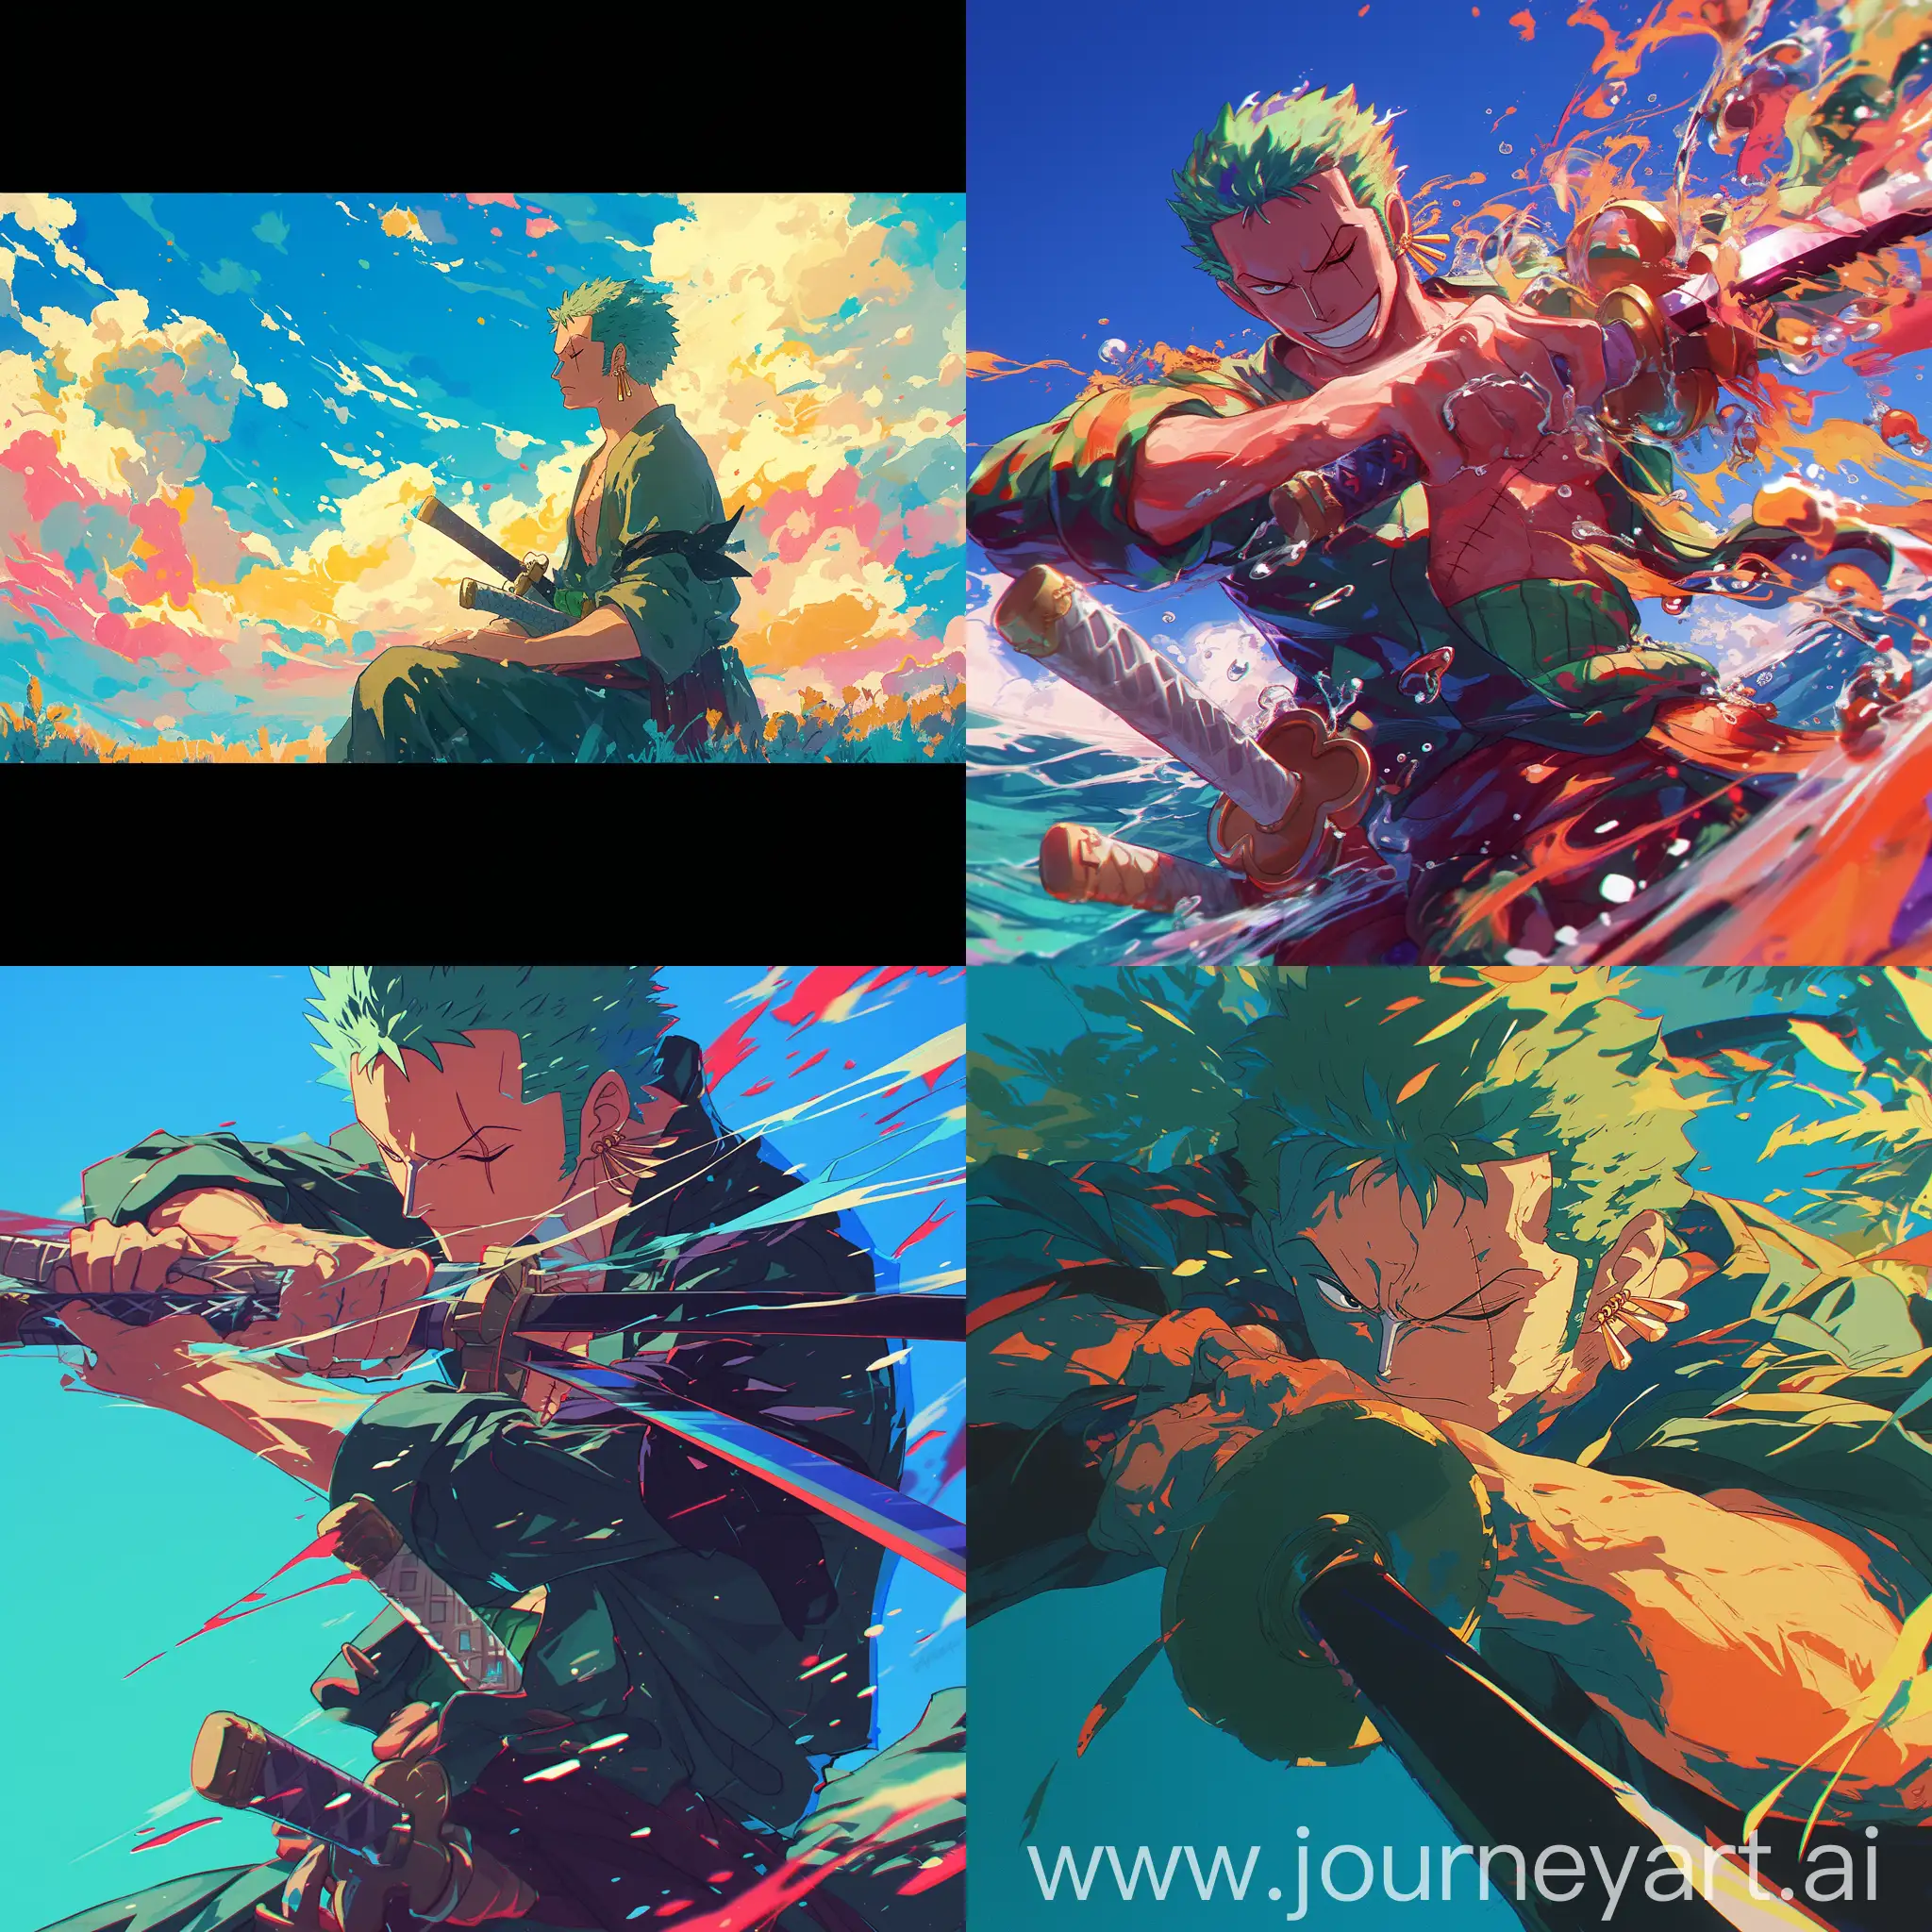 Zoro-from-One-Piece-Anime-in-Cinematic-Studio-Ghibli-Style